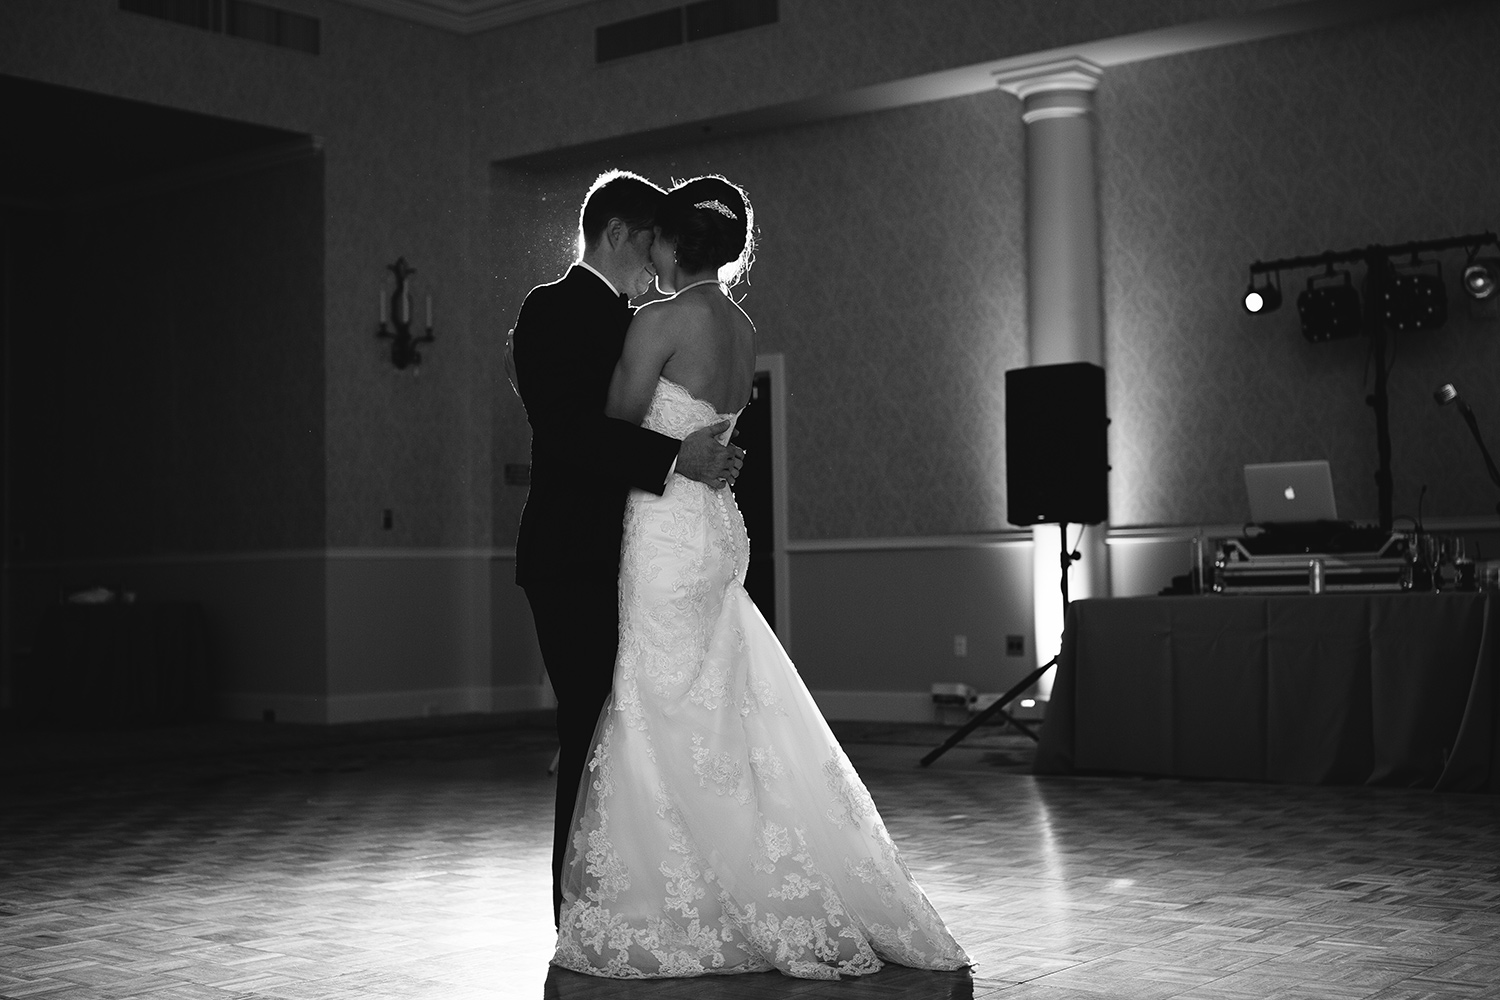 Black and white picture of bride and groom dancing with uplights in the background